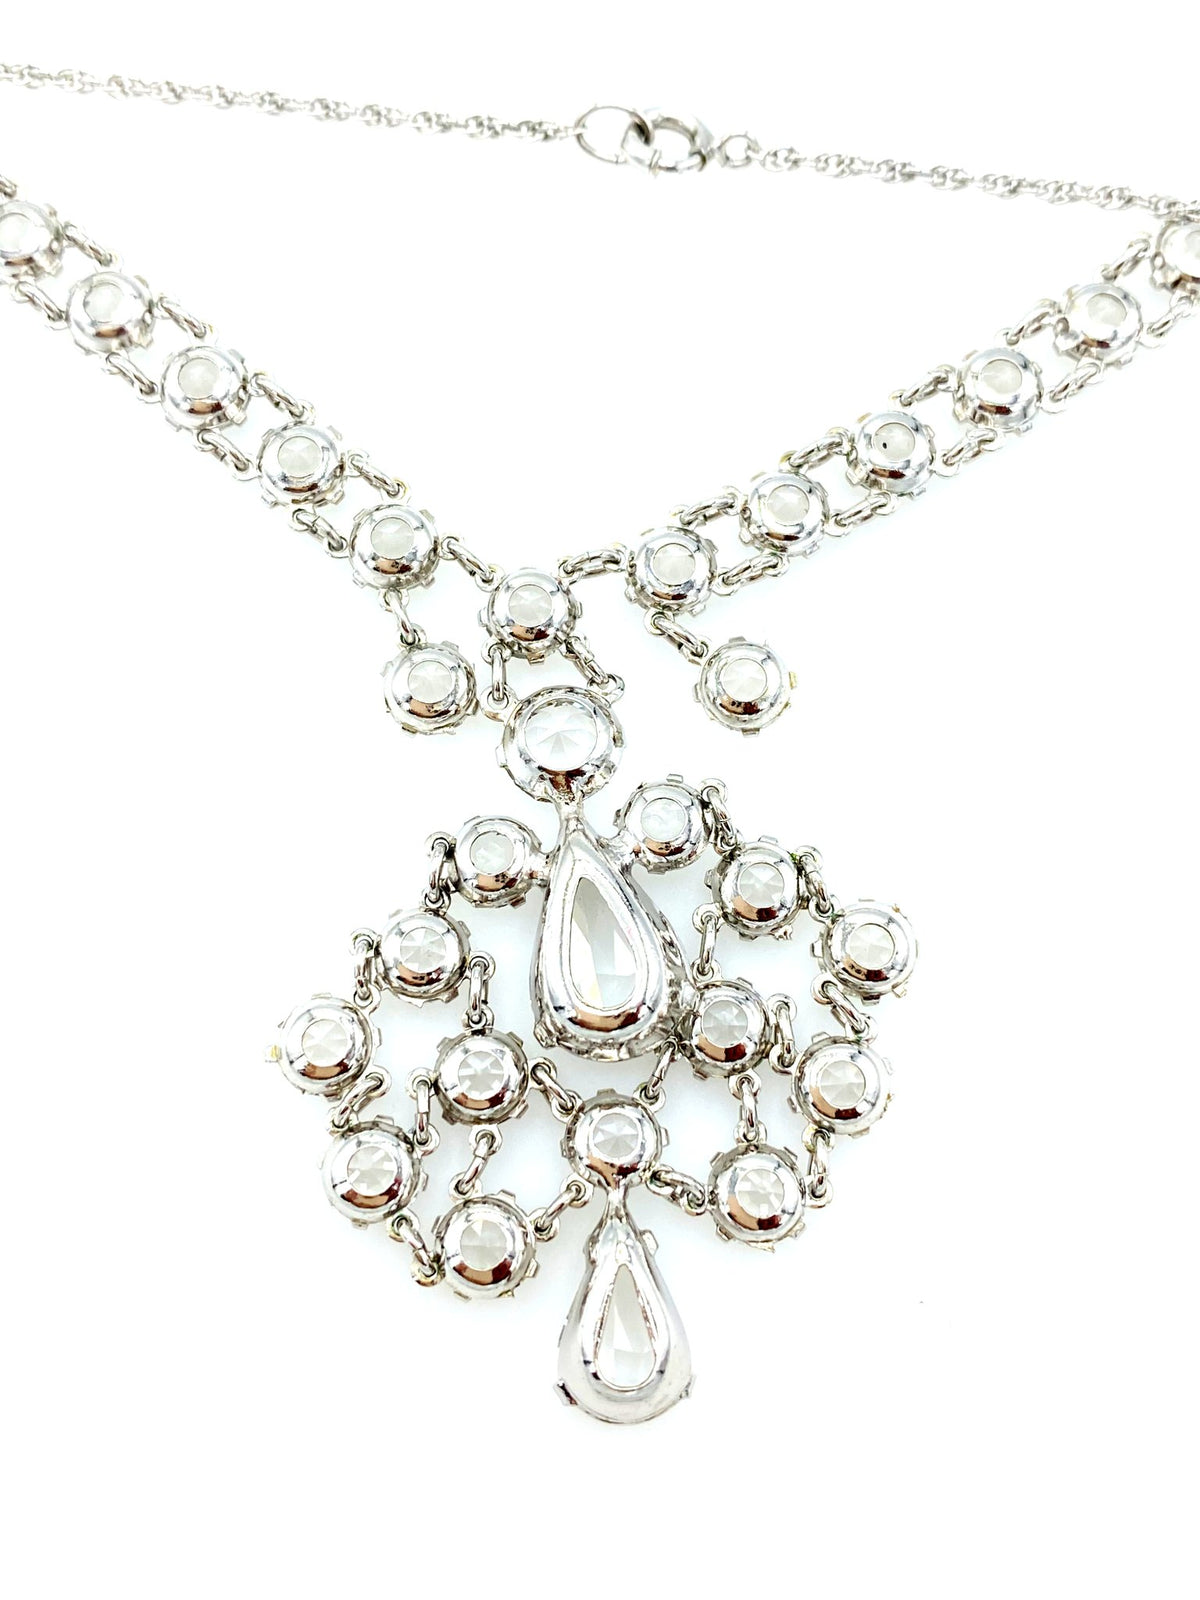 Art Deco White Gold Filled Crystal Statement Bridal Vintage Necklace - 24 Wishes Vintage Jewelry